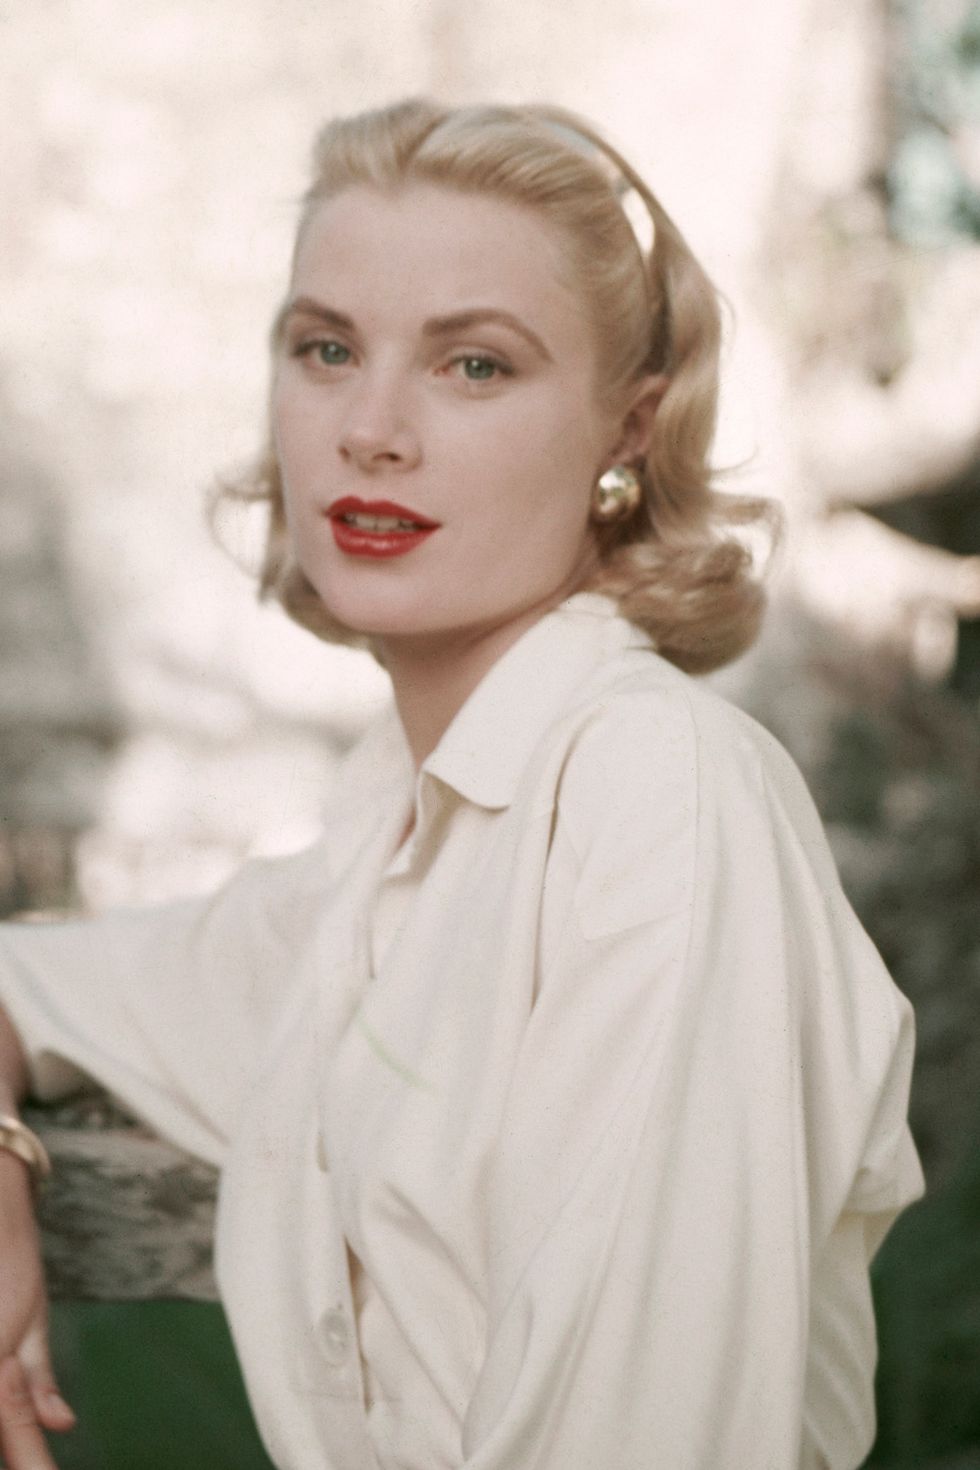 american actress grace kelly 1929   1982, circa 1955 photo by archive photosgetty images